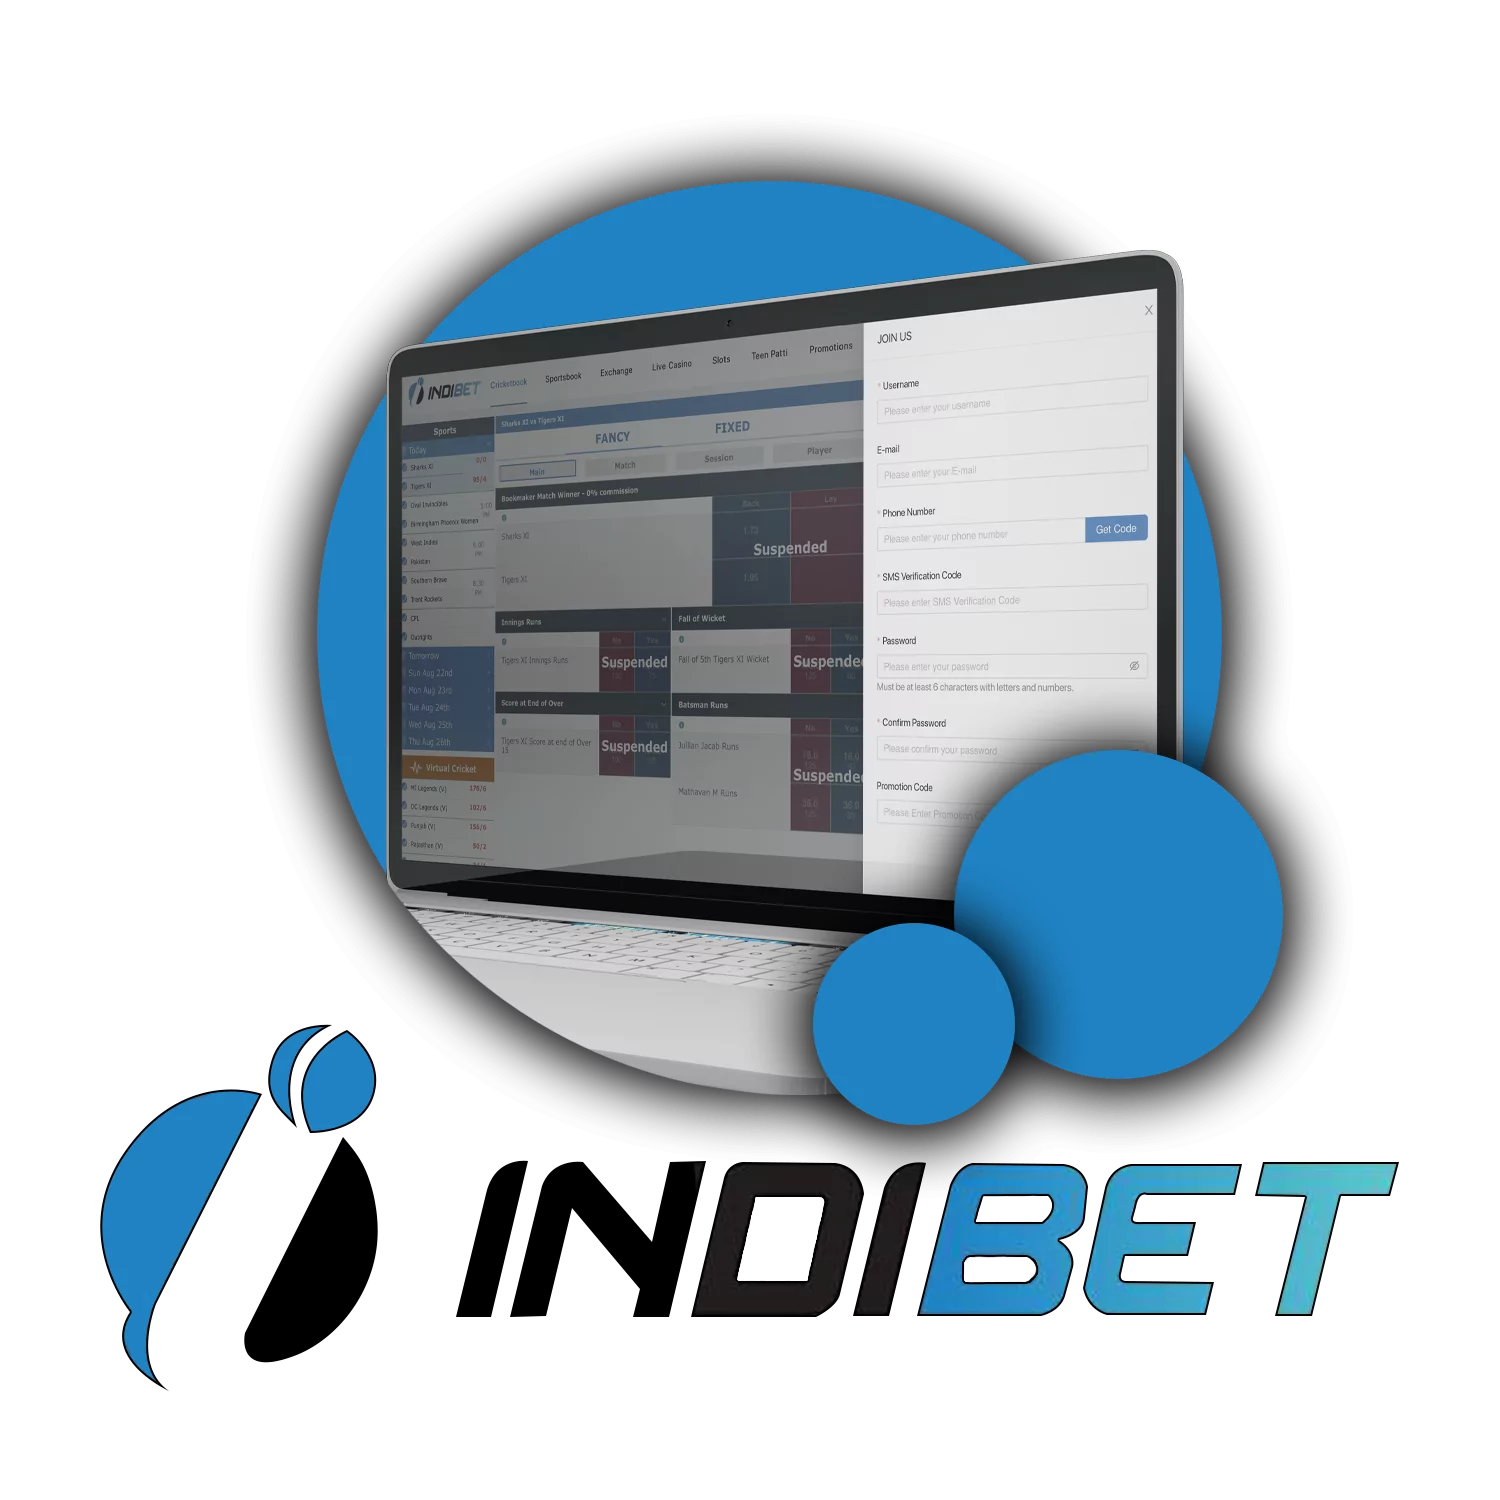 To start betting in Indibet you need to create your own account.